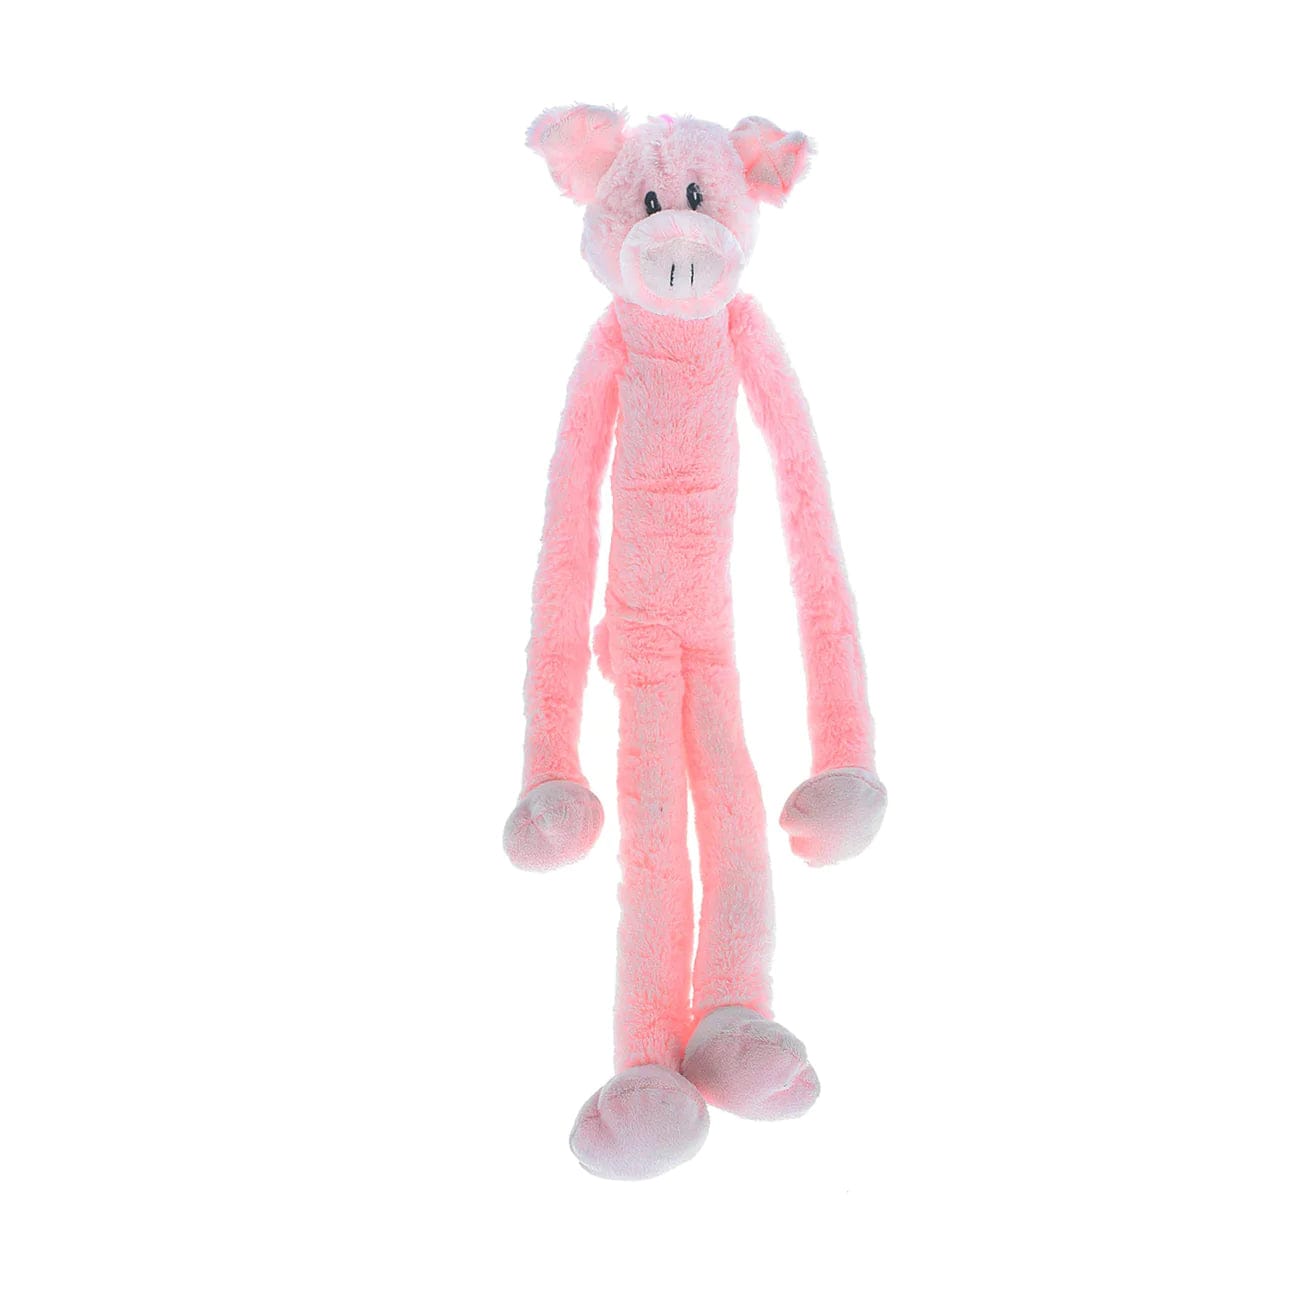 MultiPet Toy Swingin' Slevins Large Plush Toy w/ Long Arms and Legs - 30" (Pig)